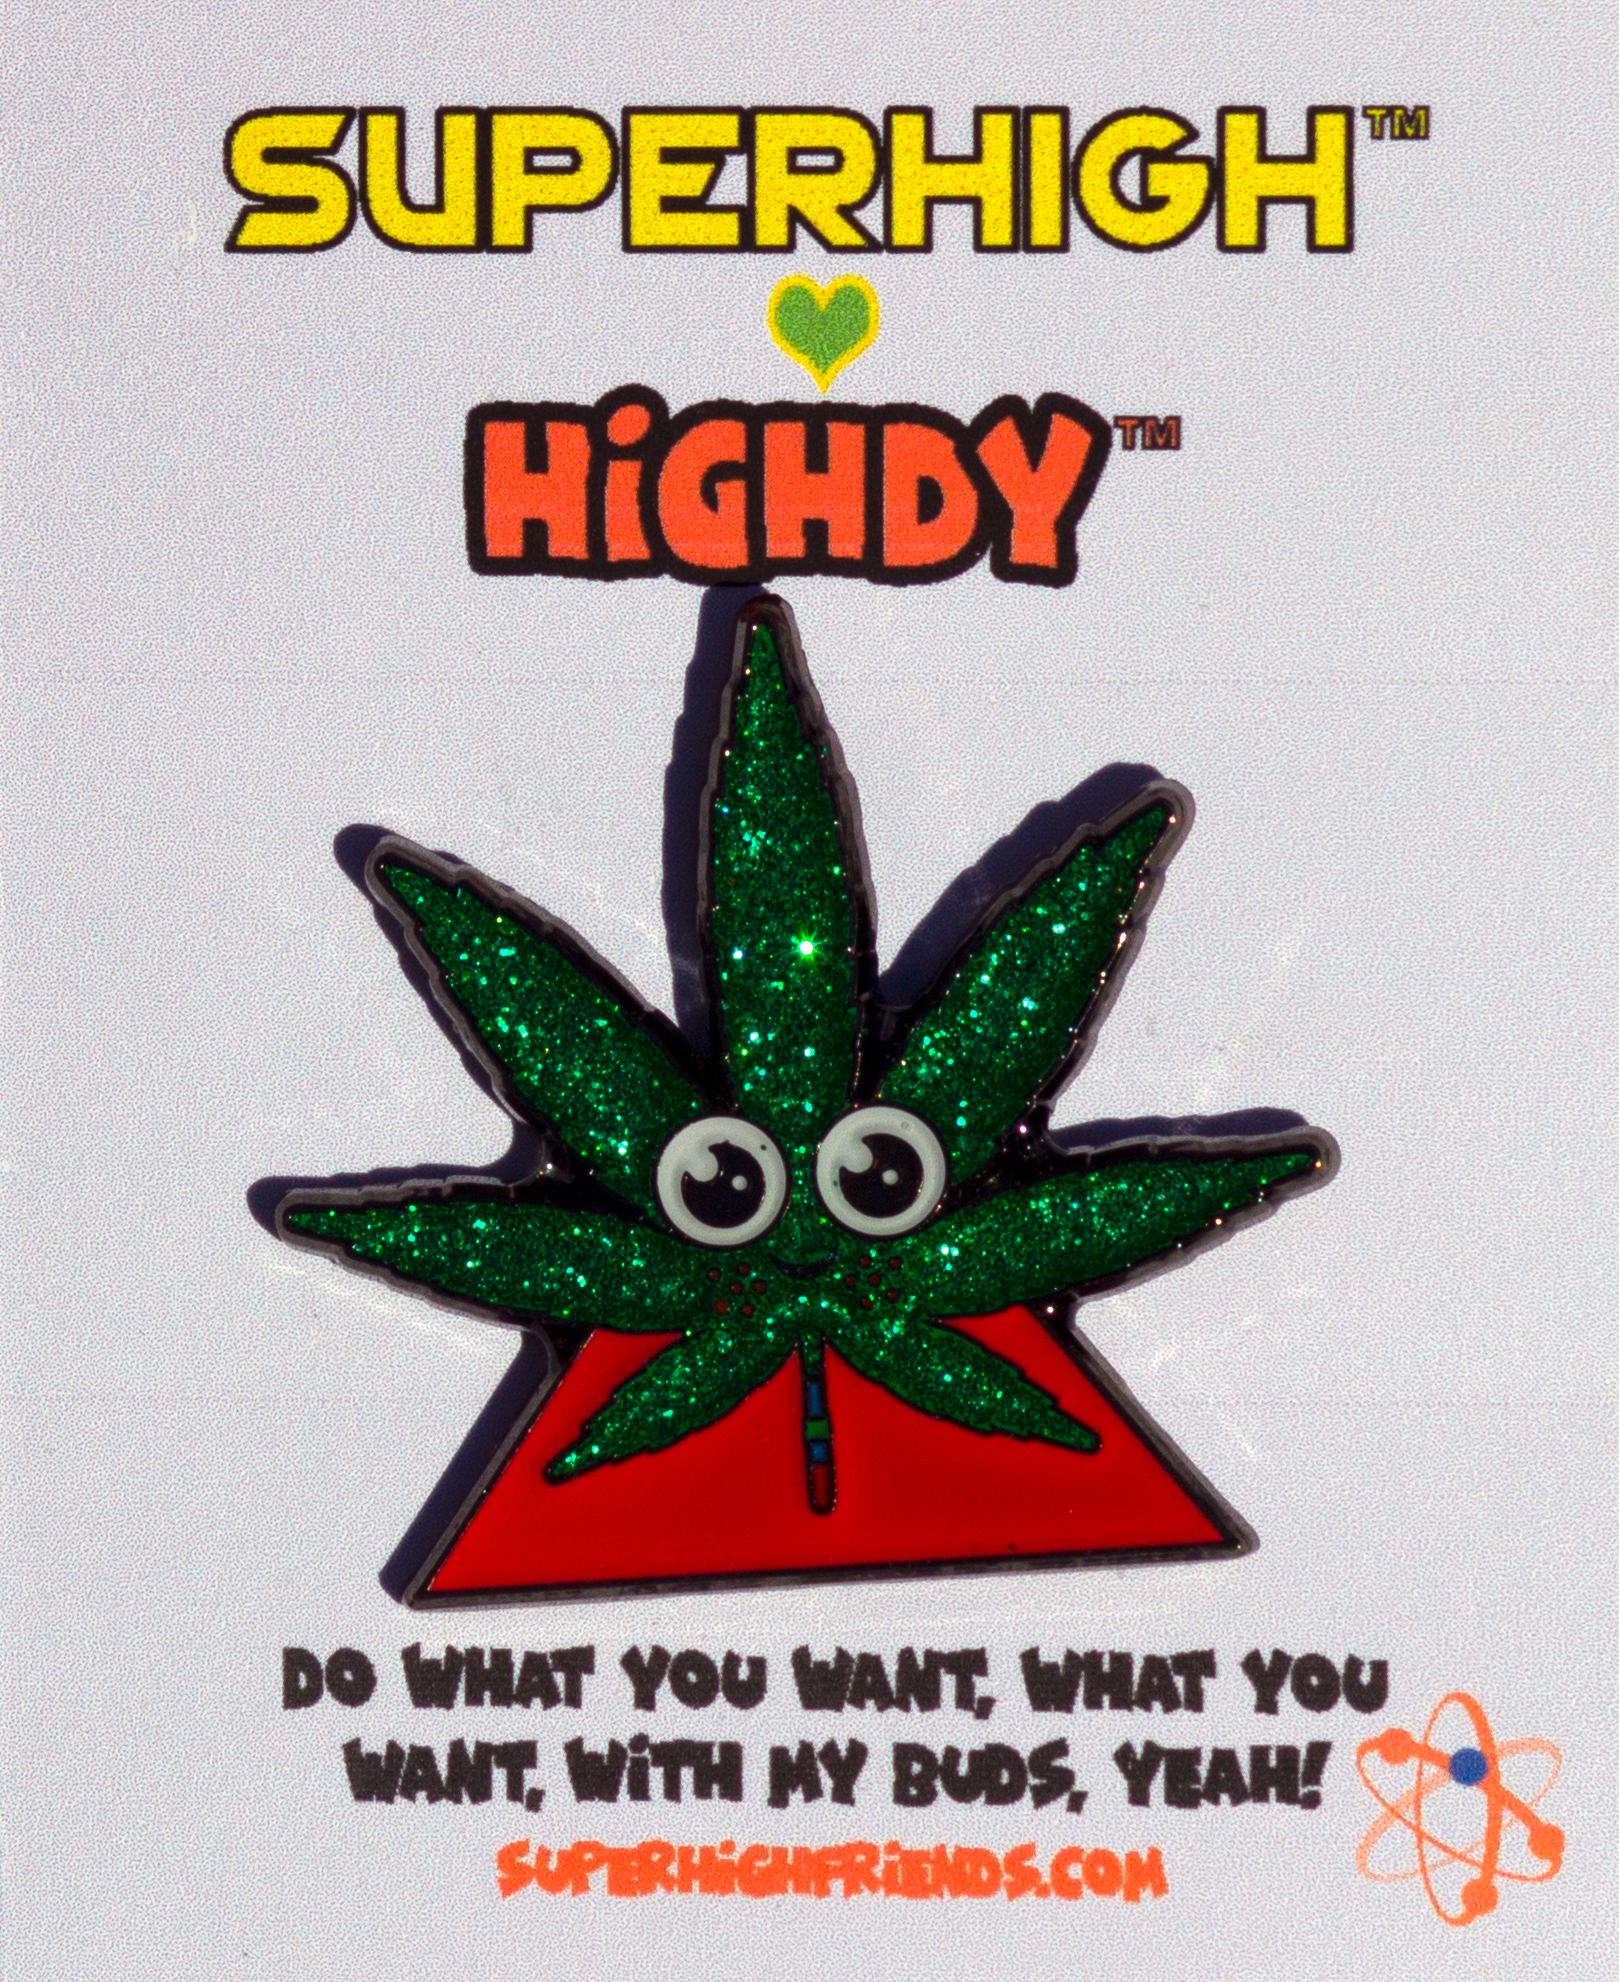 Superhigh Supersparkle - Limited Edition - Enamel Pin